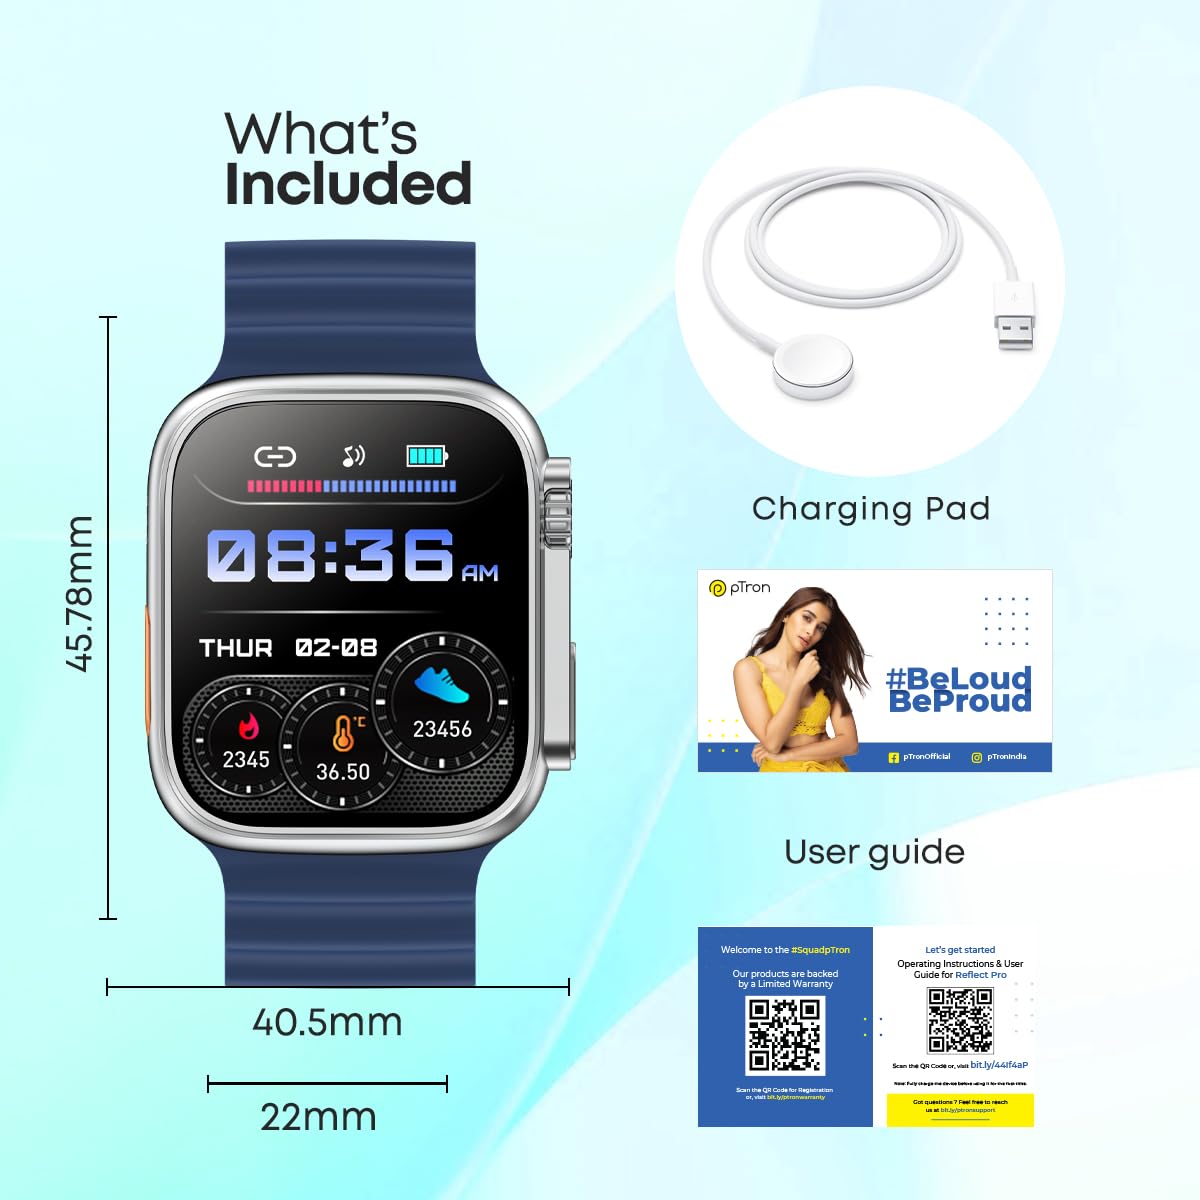 pTron Newly Launched Reflect Pro Smartwatch, Bluetooth Calling, 1.85" Full Touch Display, 600 NITS, Digital Crown, Metal Frame, 100+ Watch Faces, HR, SpO2, Voice Assist, 5 Days Battery Life (Blue)